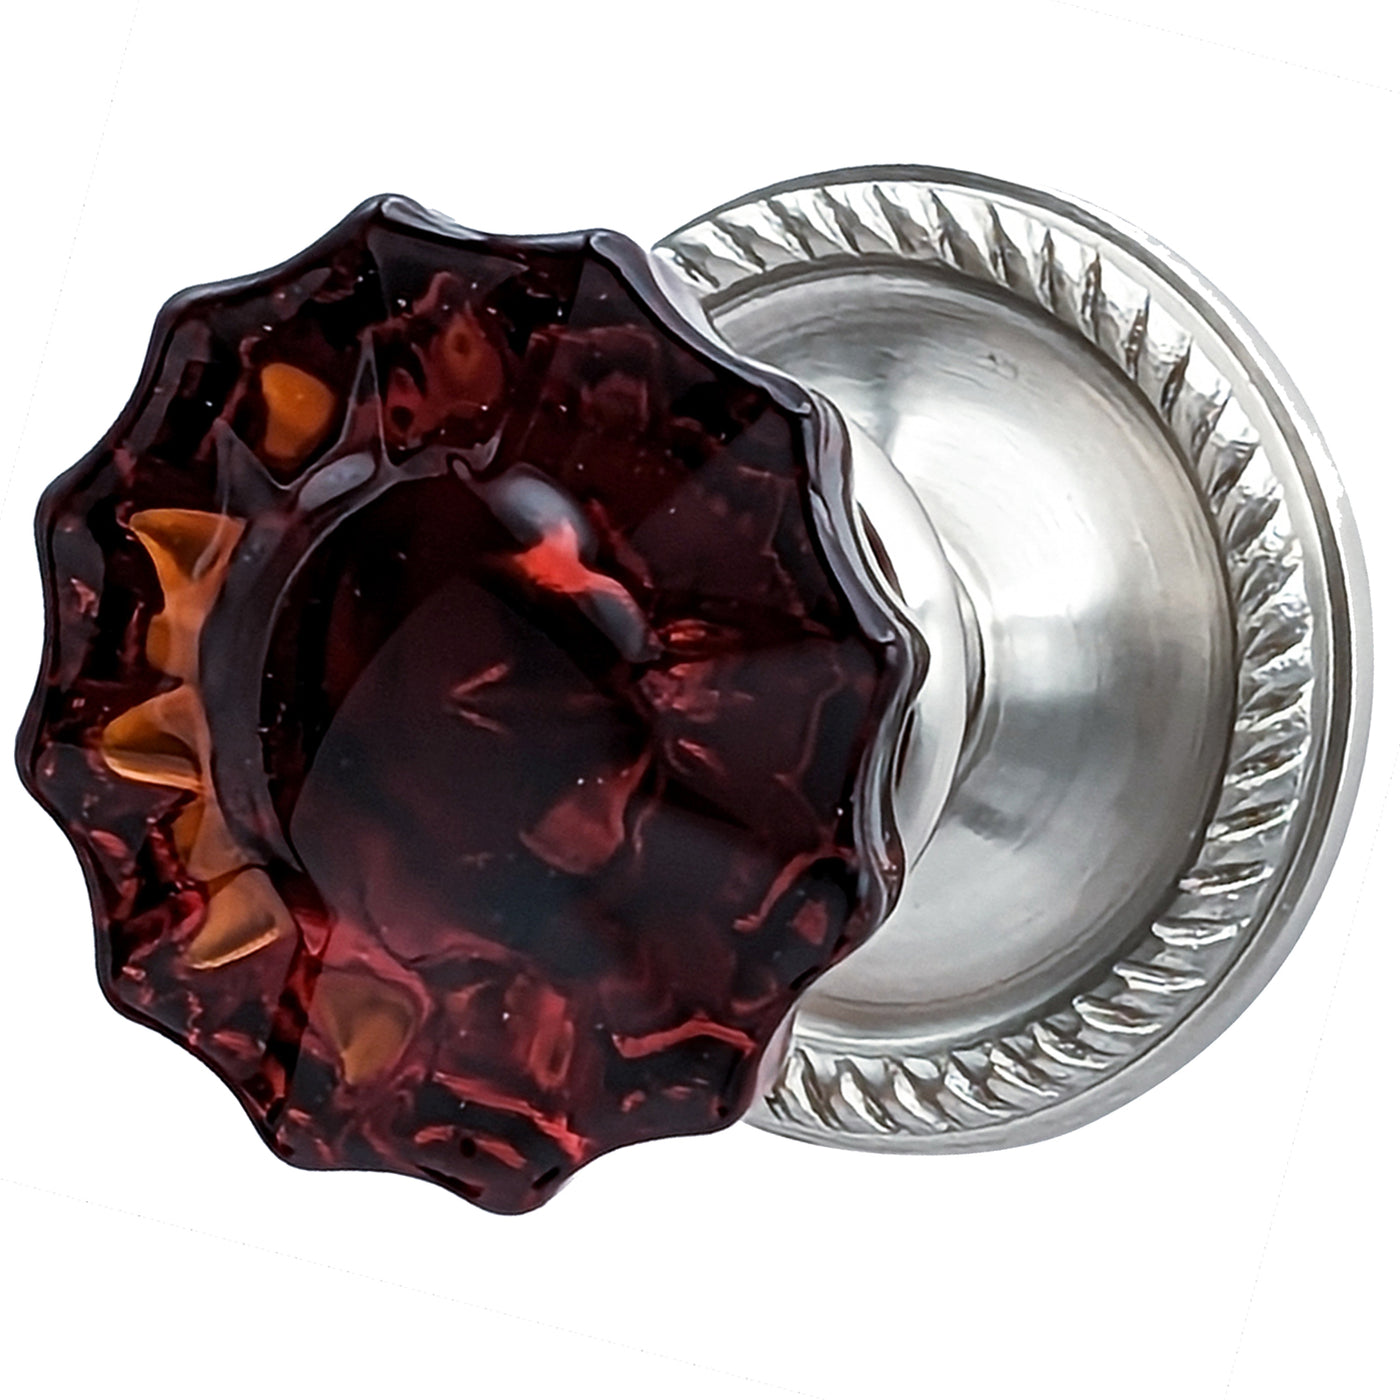 Georgian Roped Rosettes with Fluted Amber Glass Door Knobs (Several Finishes Available)